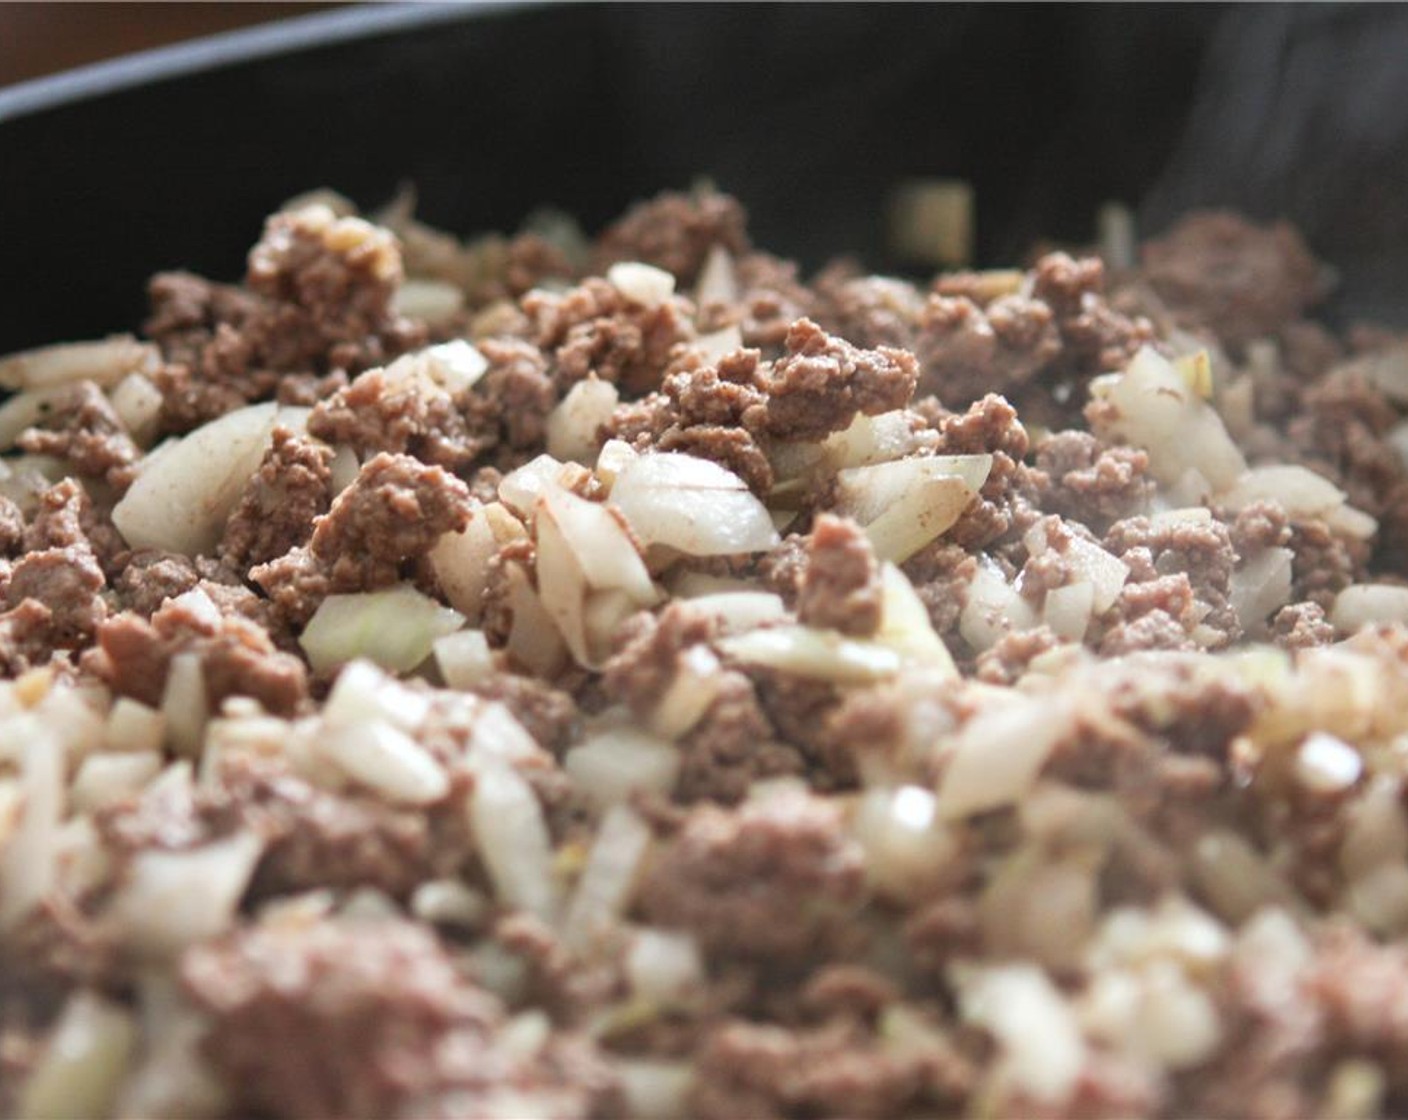 step 3 In a large skillet, add the Onion (1), Lean Ground Beef (1 lb), and Garlic (3 cloves). Cook over medium heat, stirring until beef is no longer pink. Season with Salt (1/2 tsp) and Ground Black Pepper (1/2 tsp).